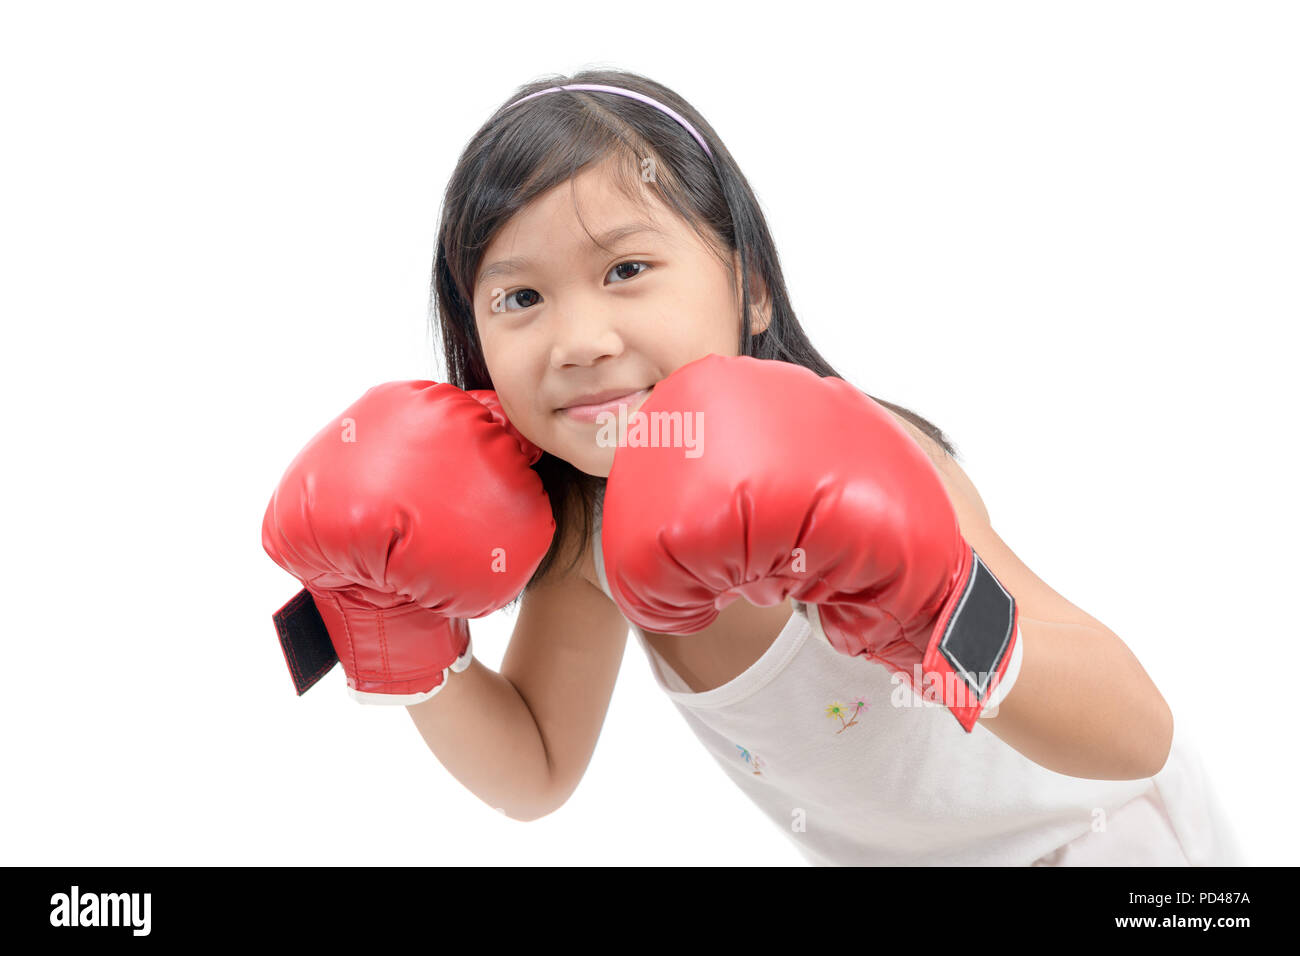 Smile girl fighting with red boxing gloves isolated on white background, exercise and healthy concept Stock Photo